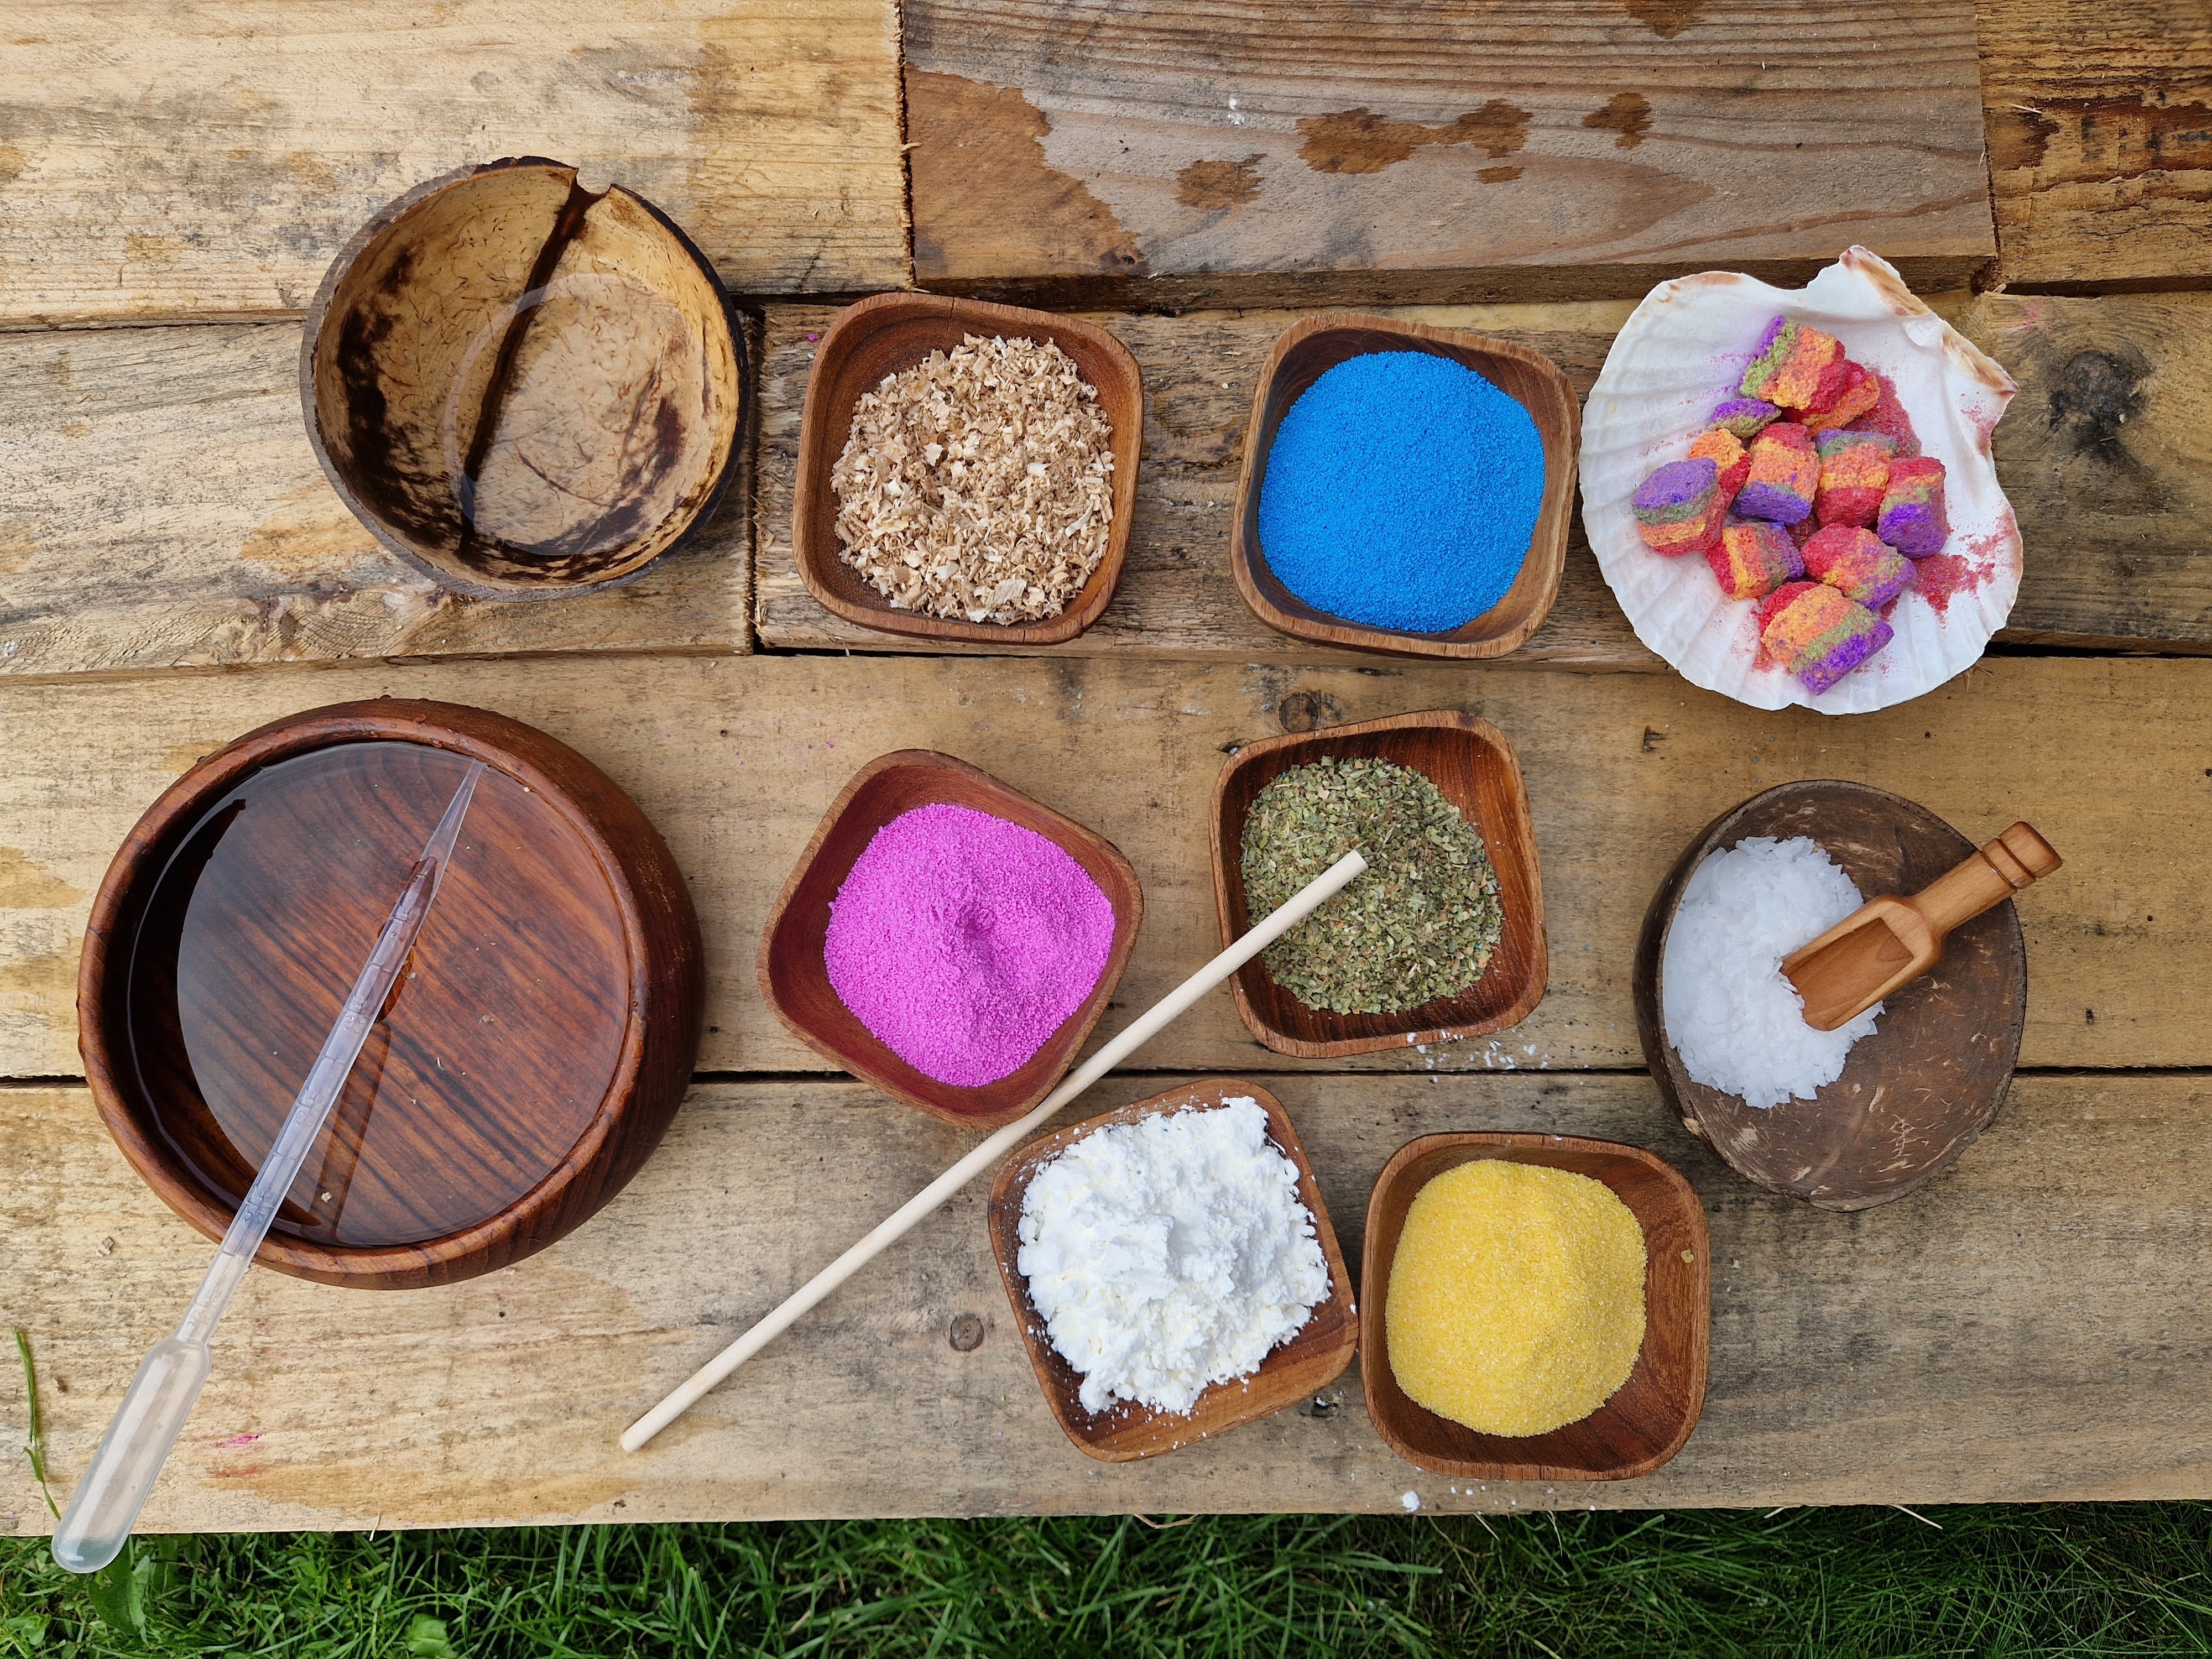 The Potion Lab: Children's Magical Potion Kits – The Potion Lab UK